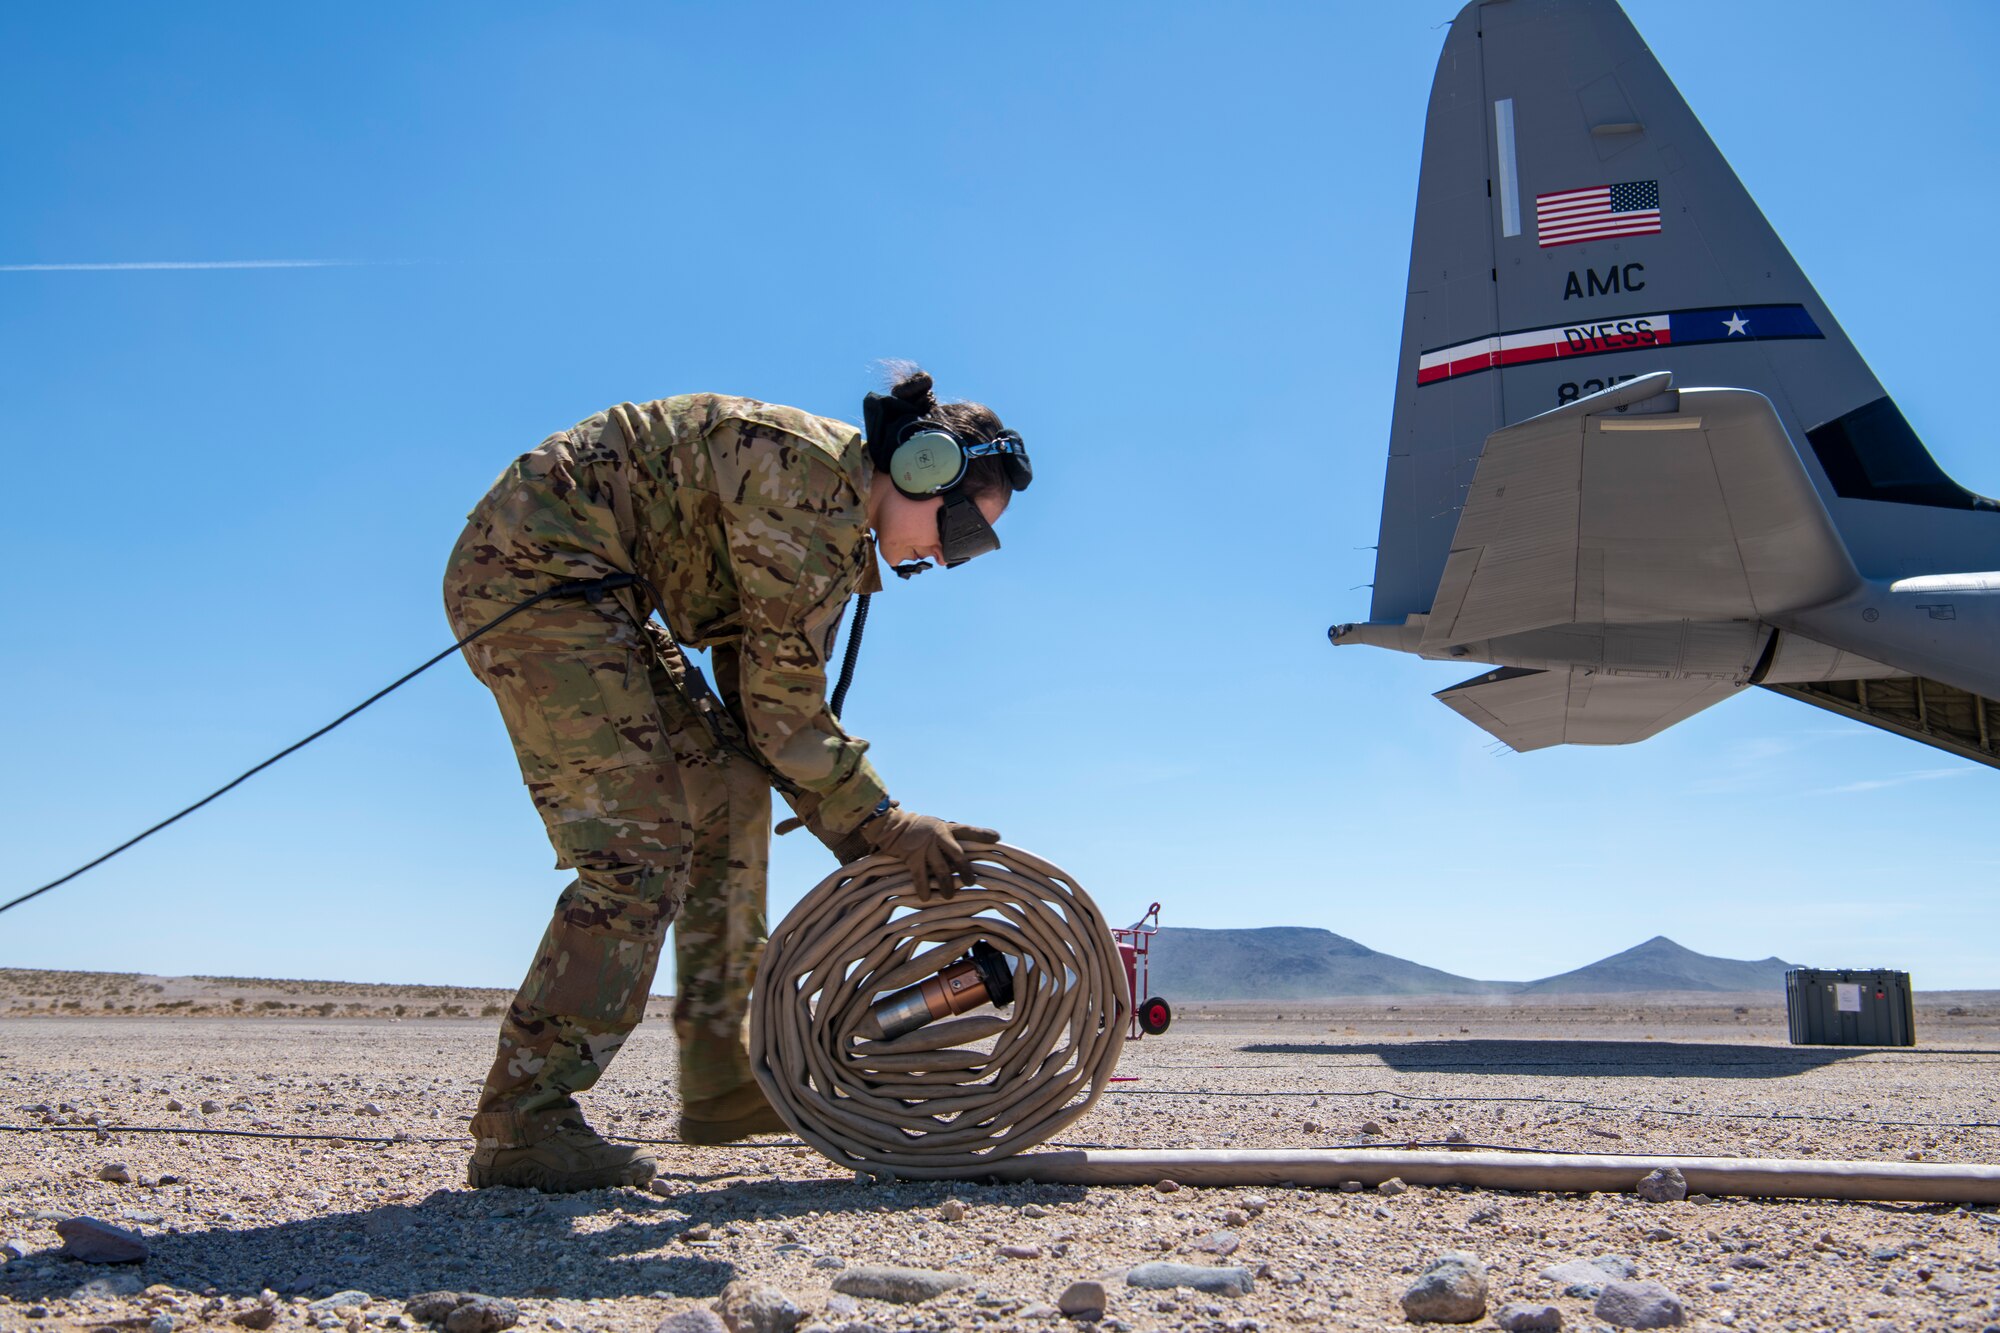 U.S. Air Force Tech. Sgt. Tristan Geray, 40th Airlift Squadron loadmaster, wraps up a fuel hose during Operation Night King in the California desert March 26, 2023.